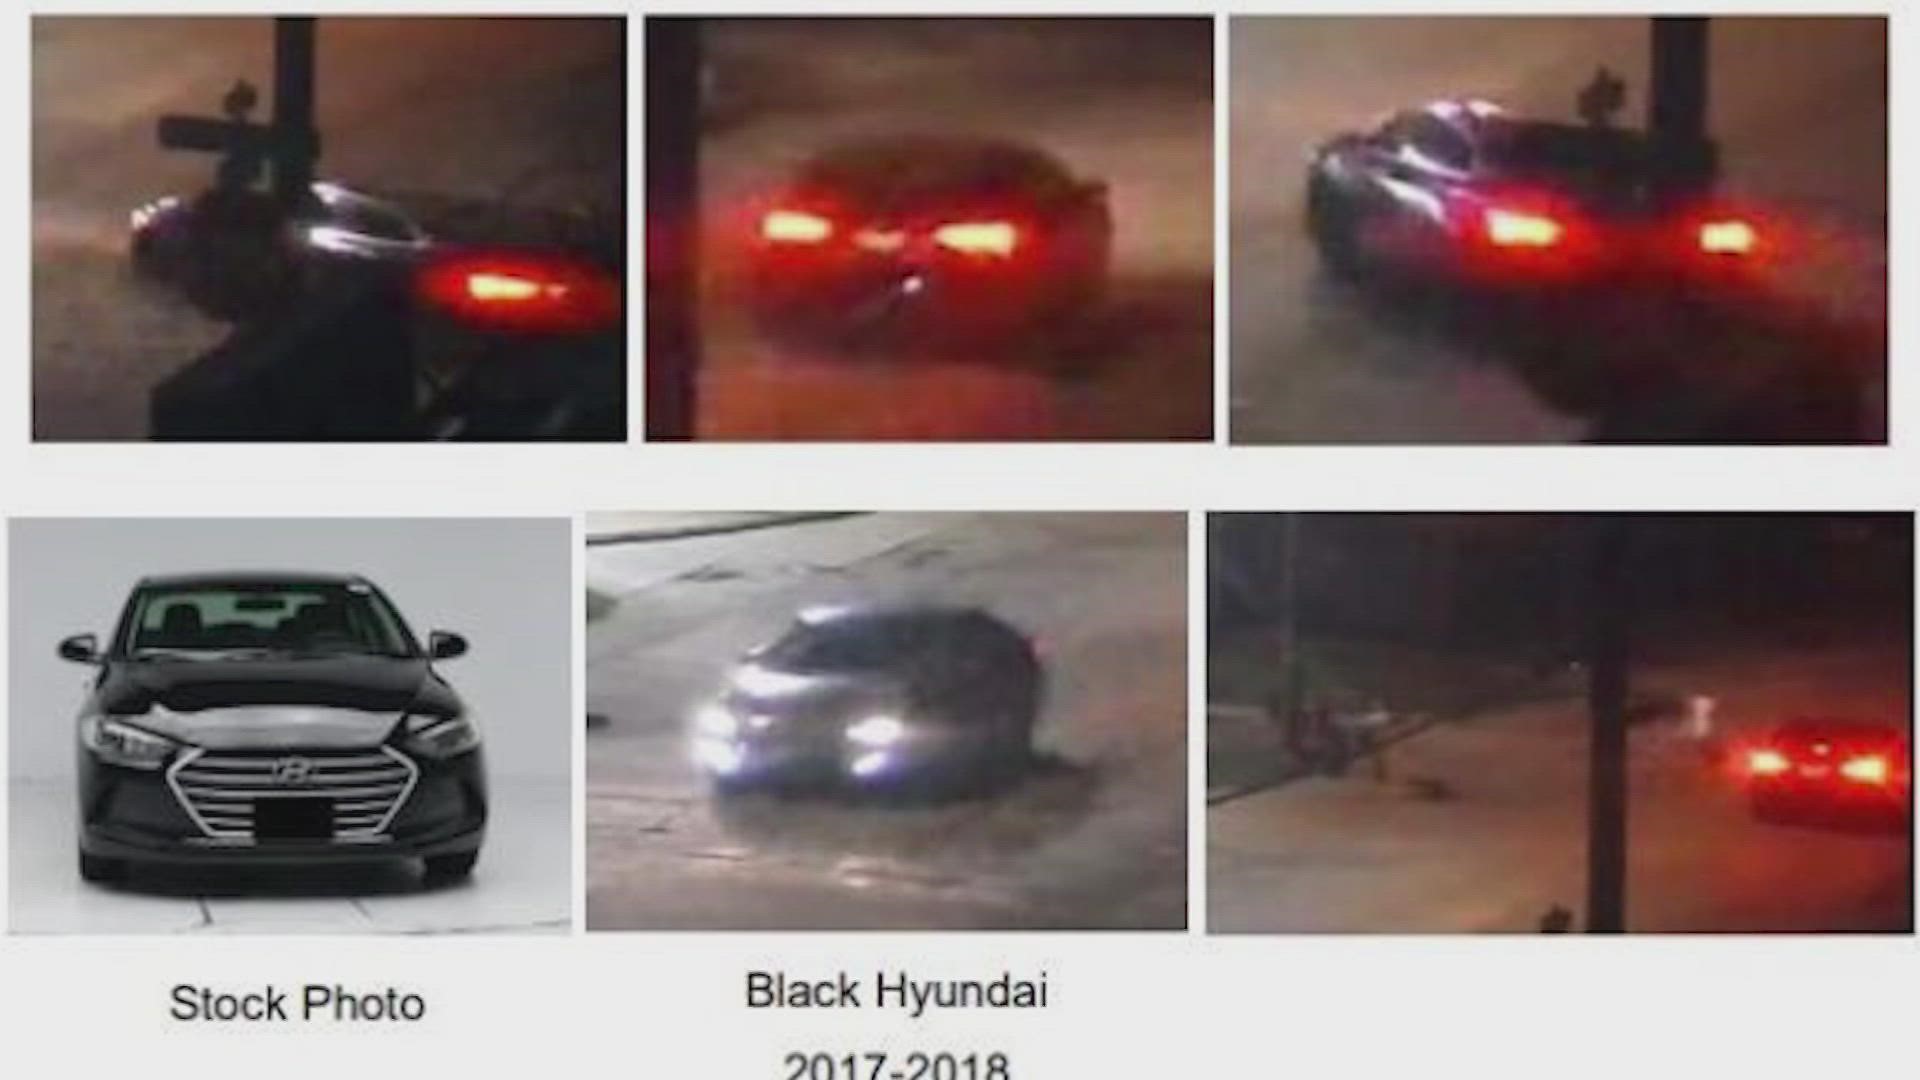 Police in North Texas are asking for the public's help identifying several vehicles involved in hit and run accidents with cyclists and pedestrians.